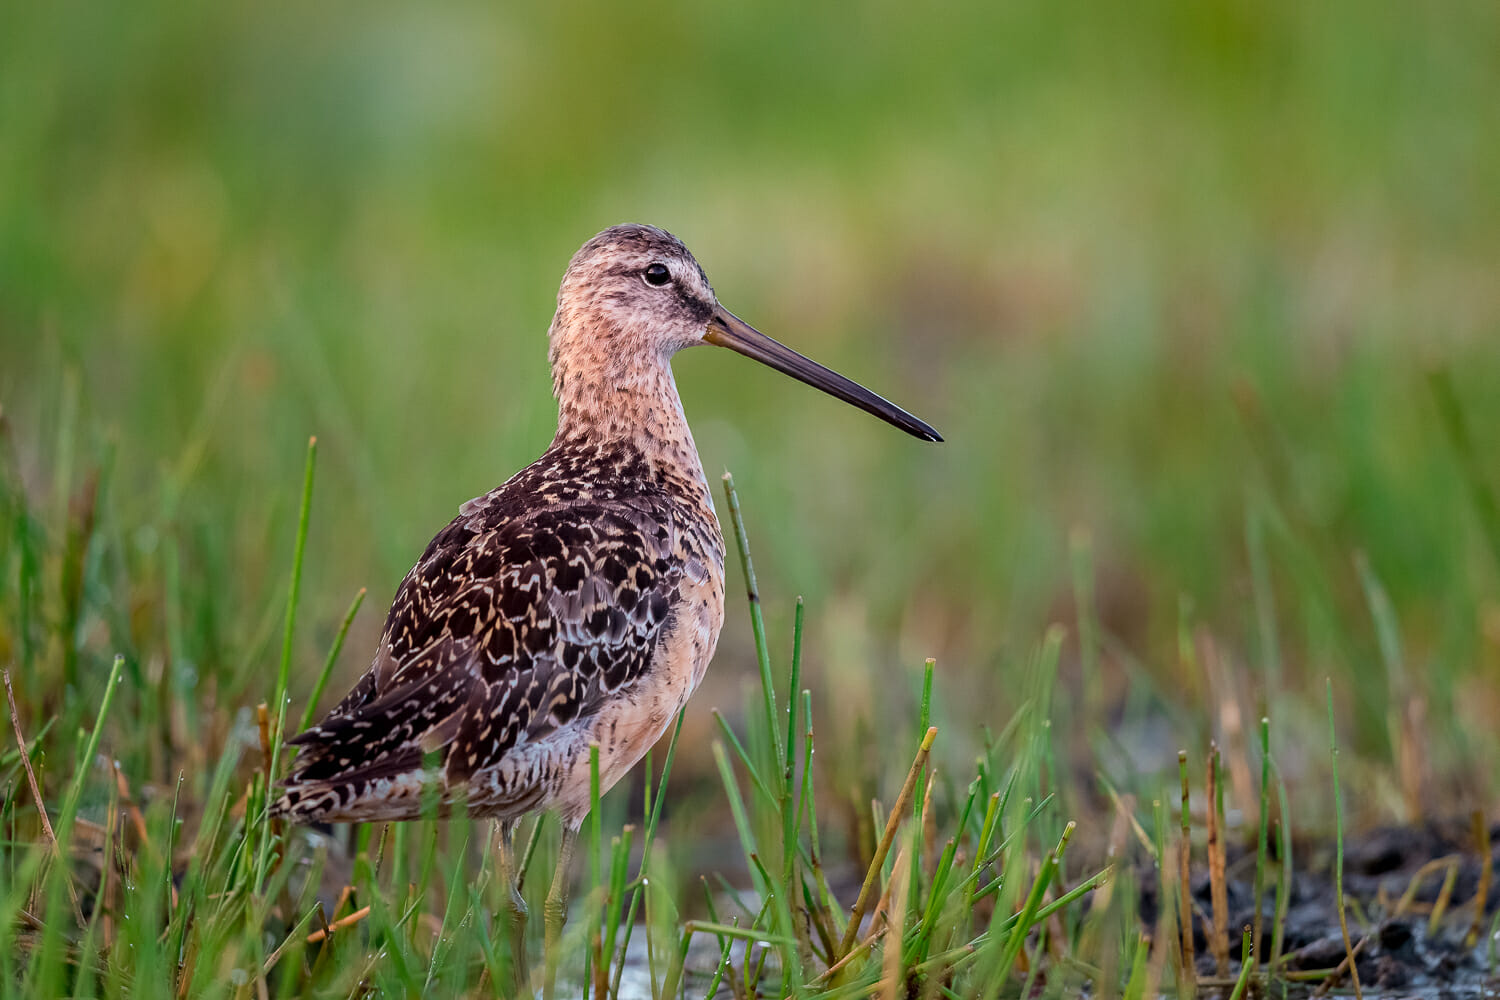 A dowitcher, a type of shorebird, stands in a marshy field